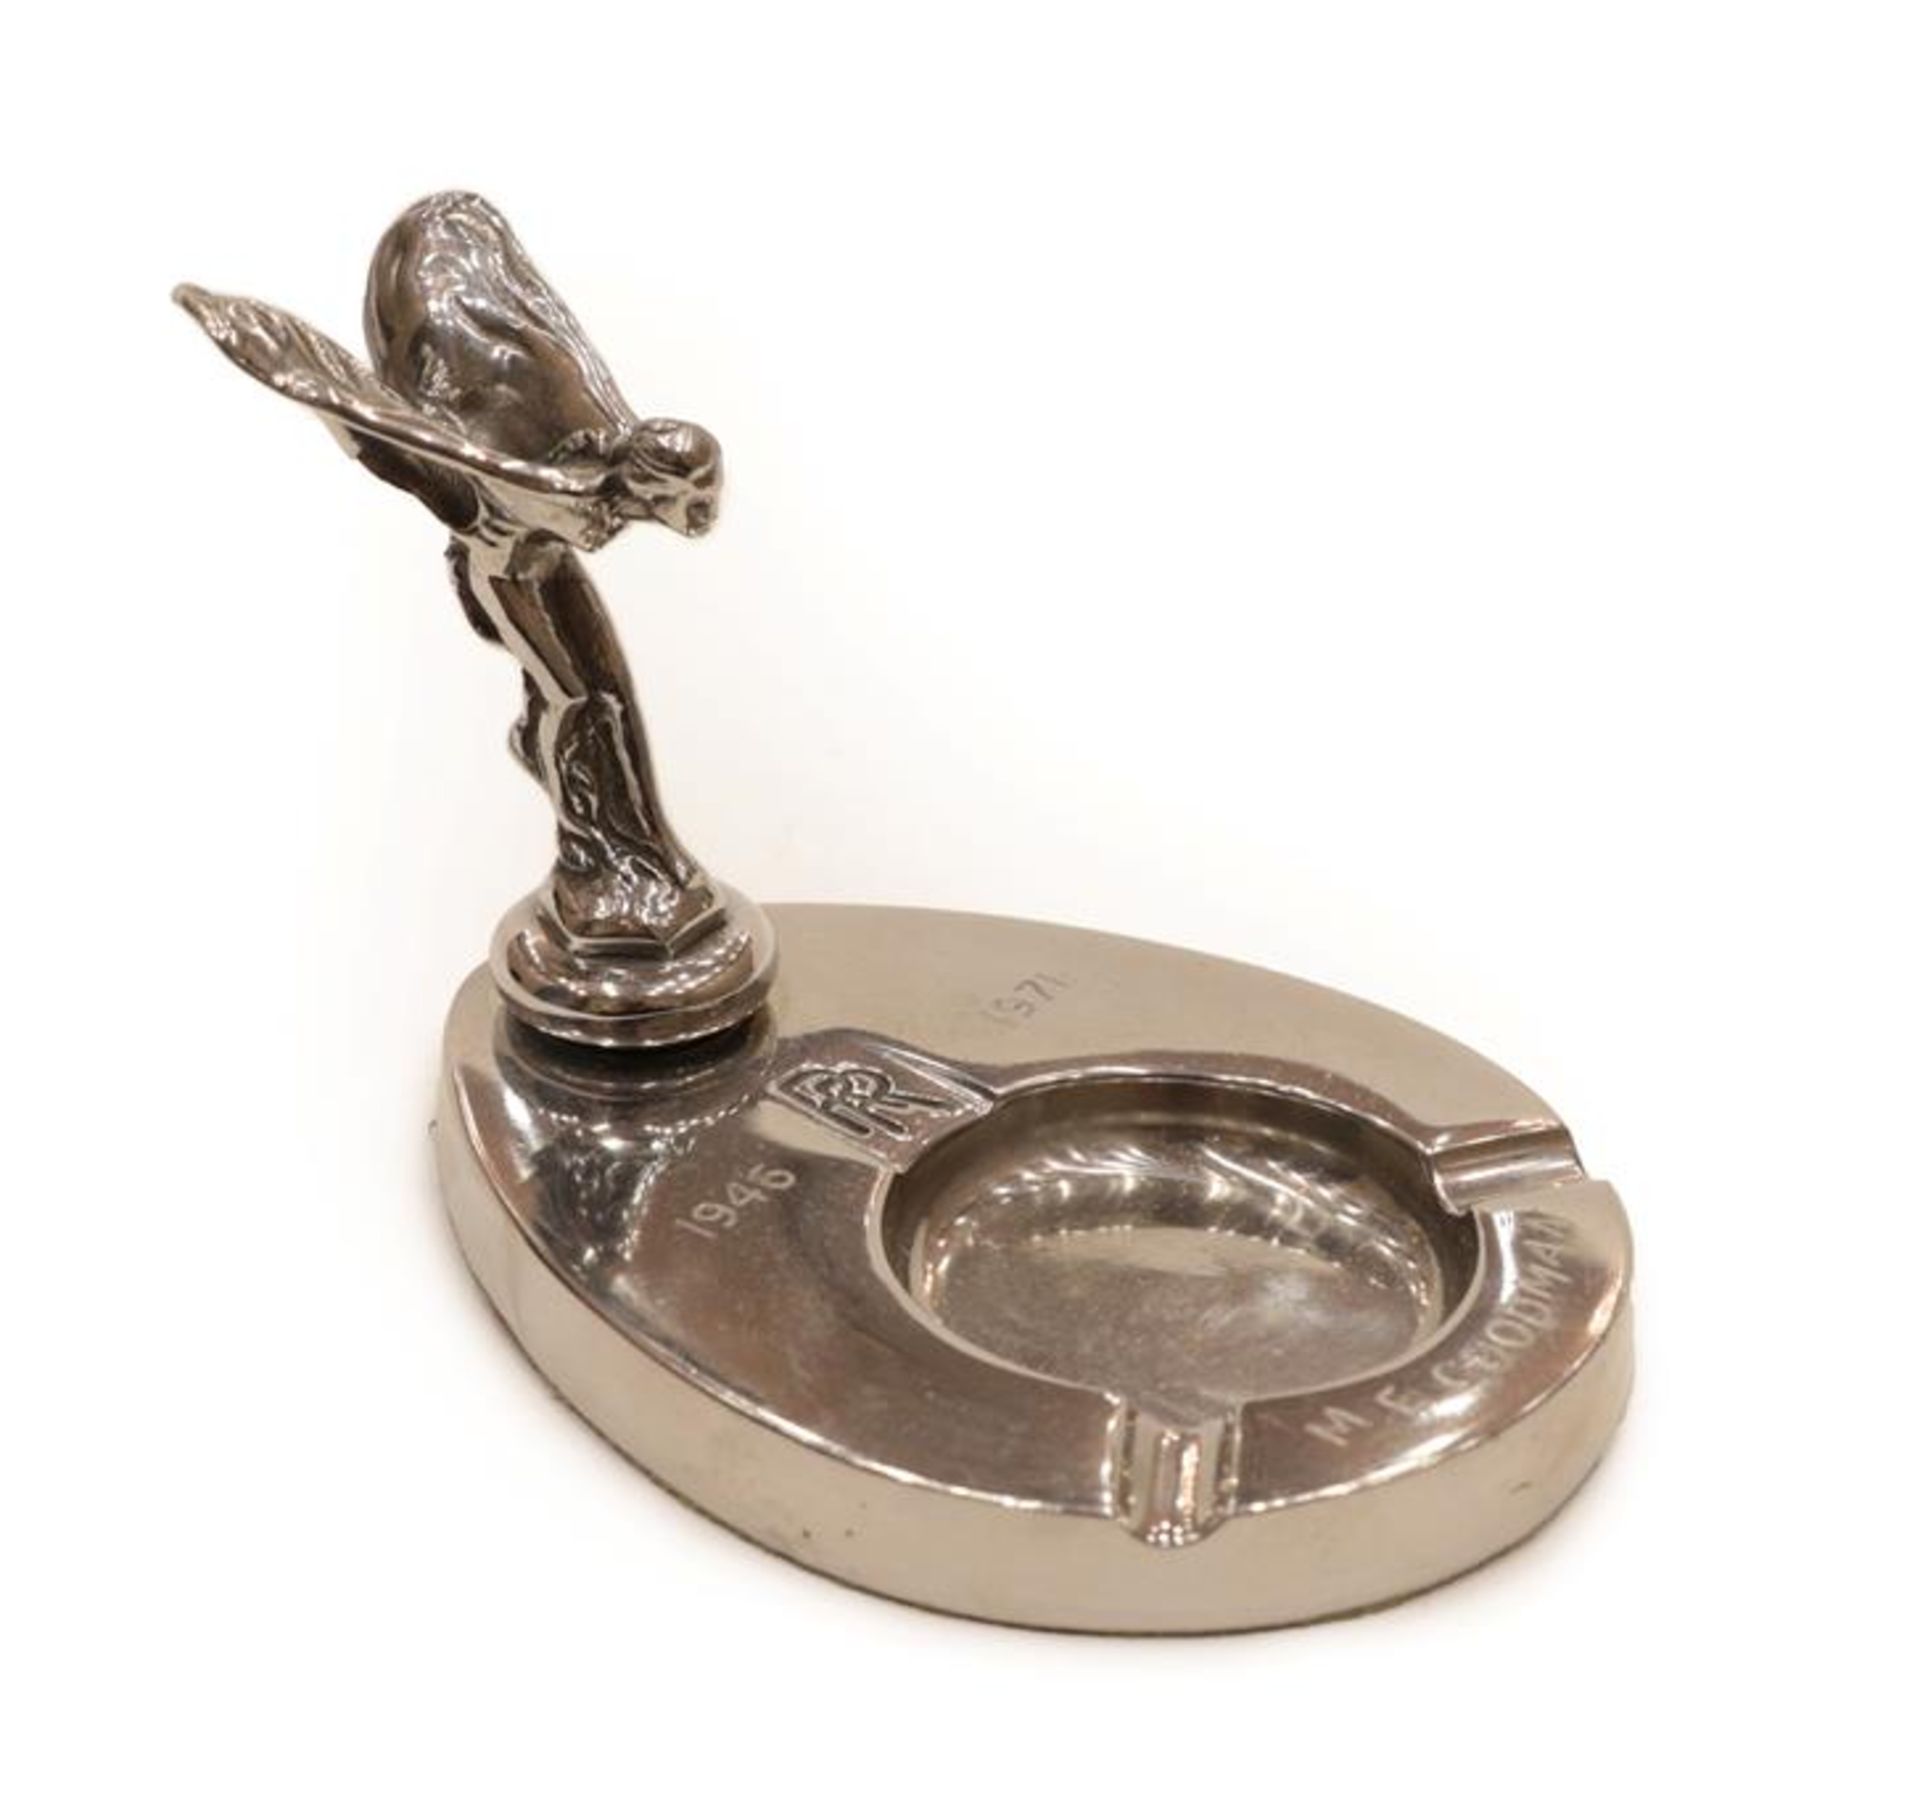 Rolls-Royce Interest: A Chromed Presentation Ashtray, For 25 Years' Service 1946-1971 Presented to M